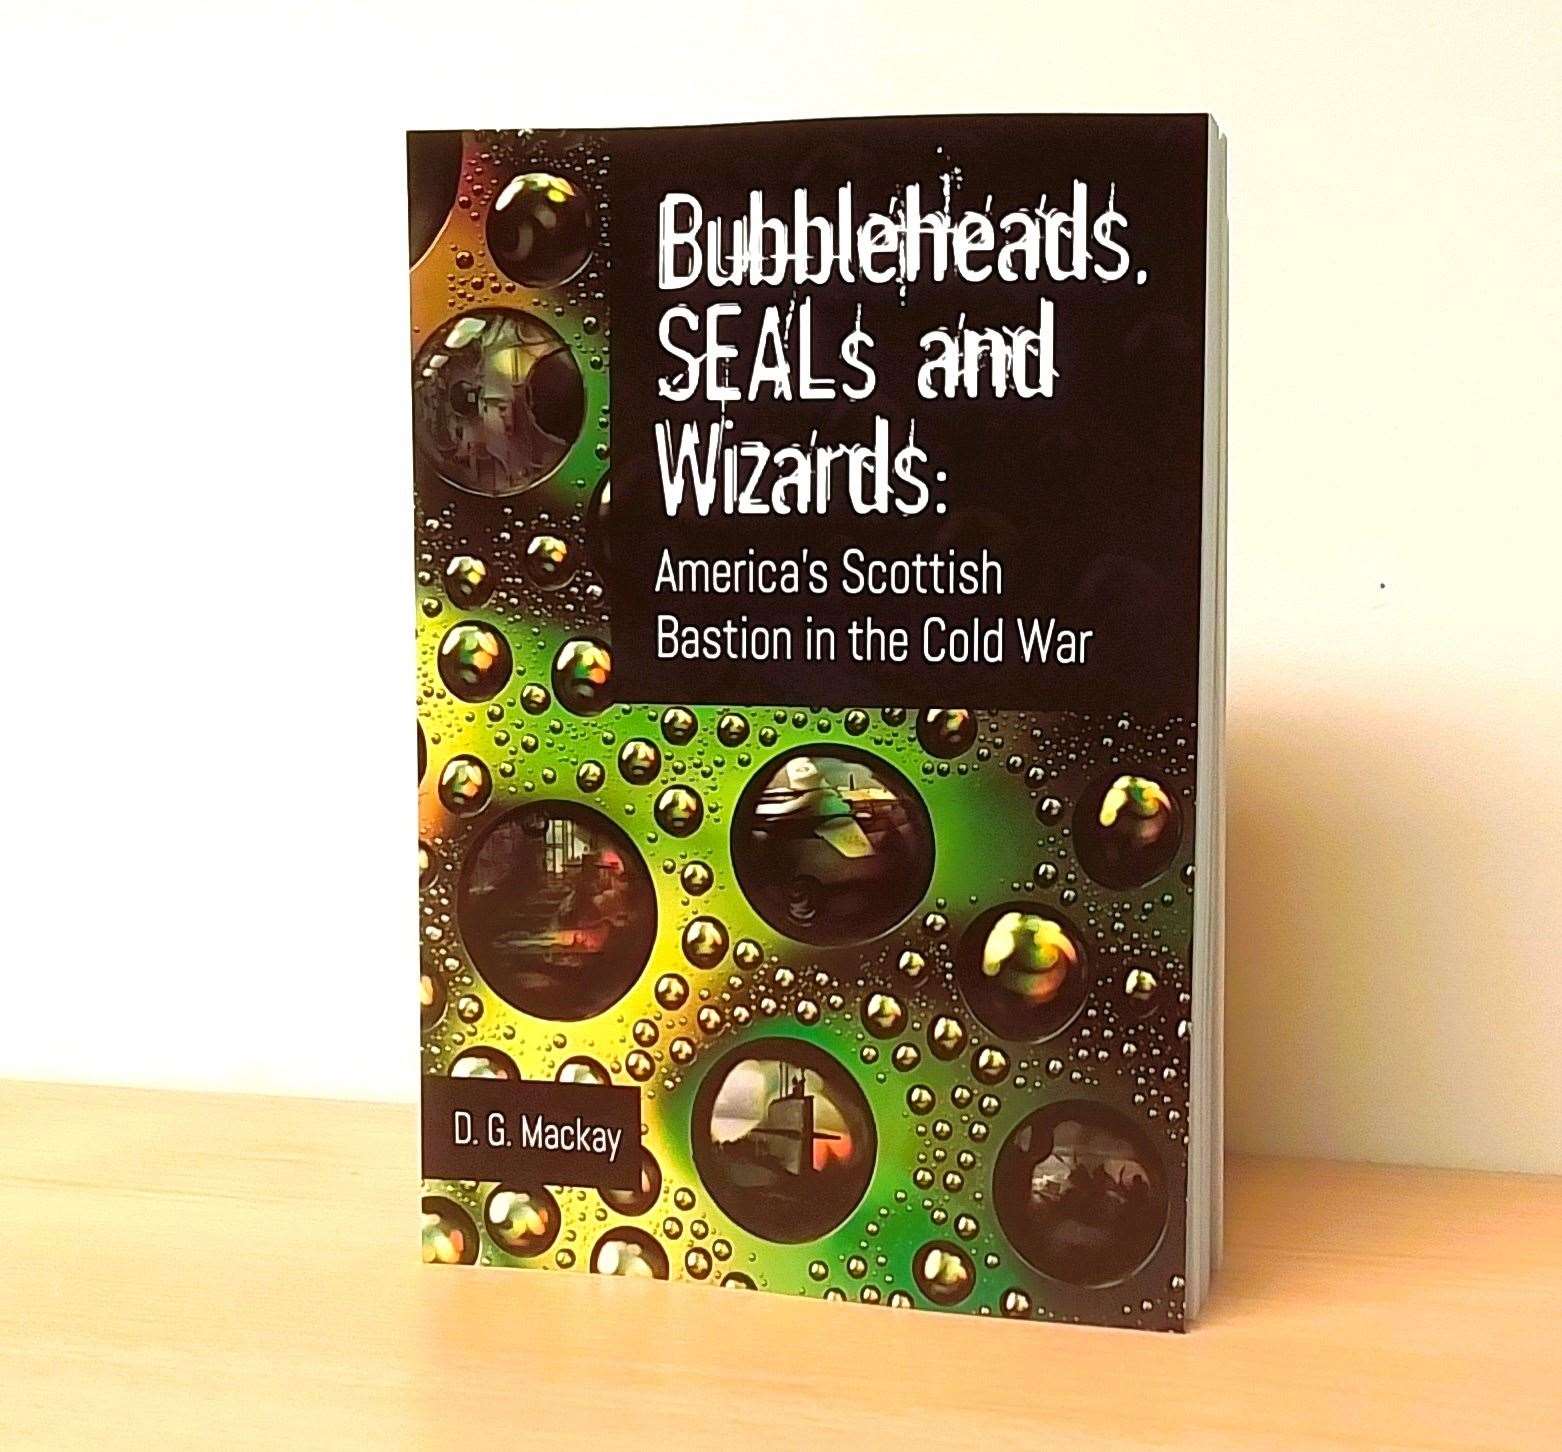 Bubbleheads book from Whittles.